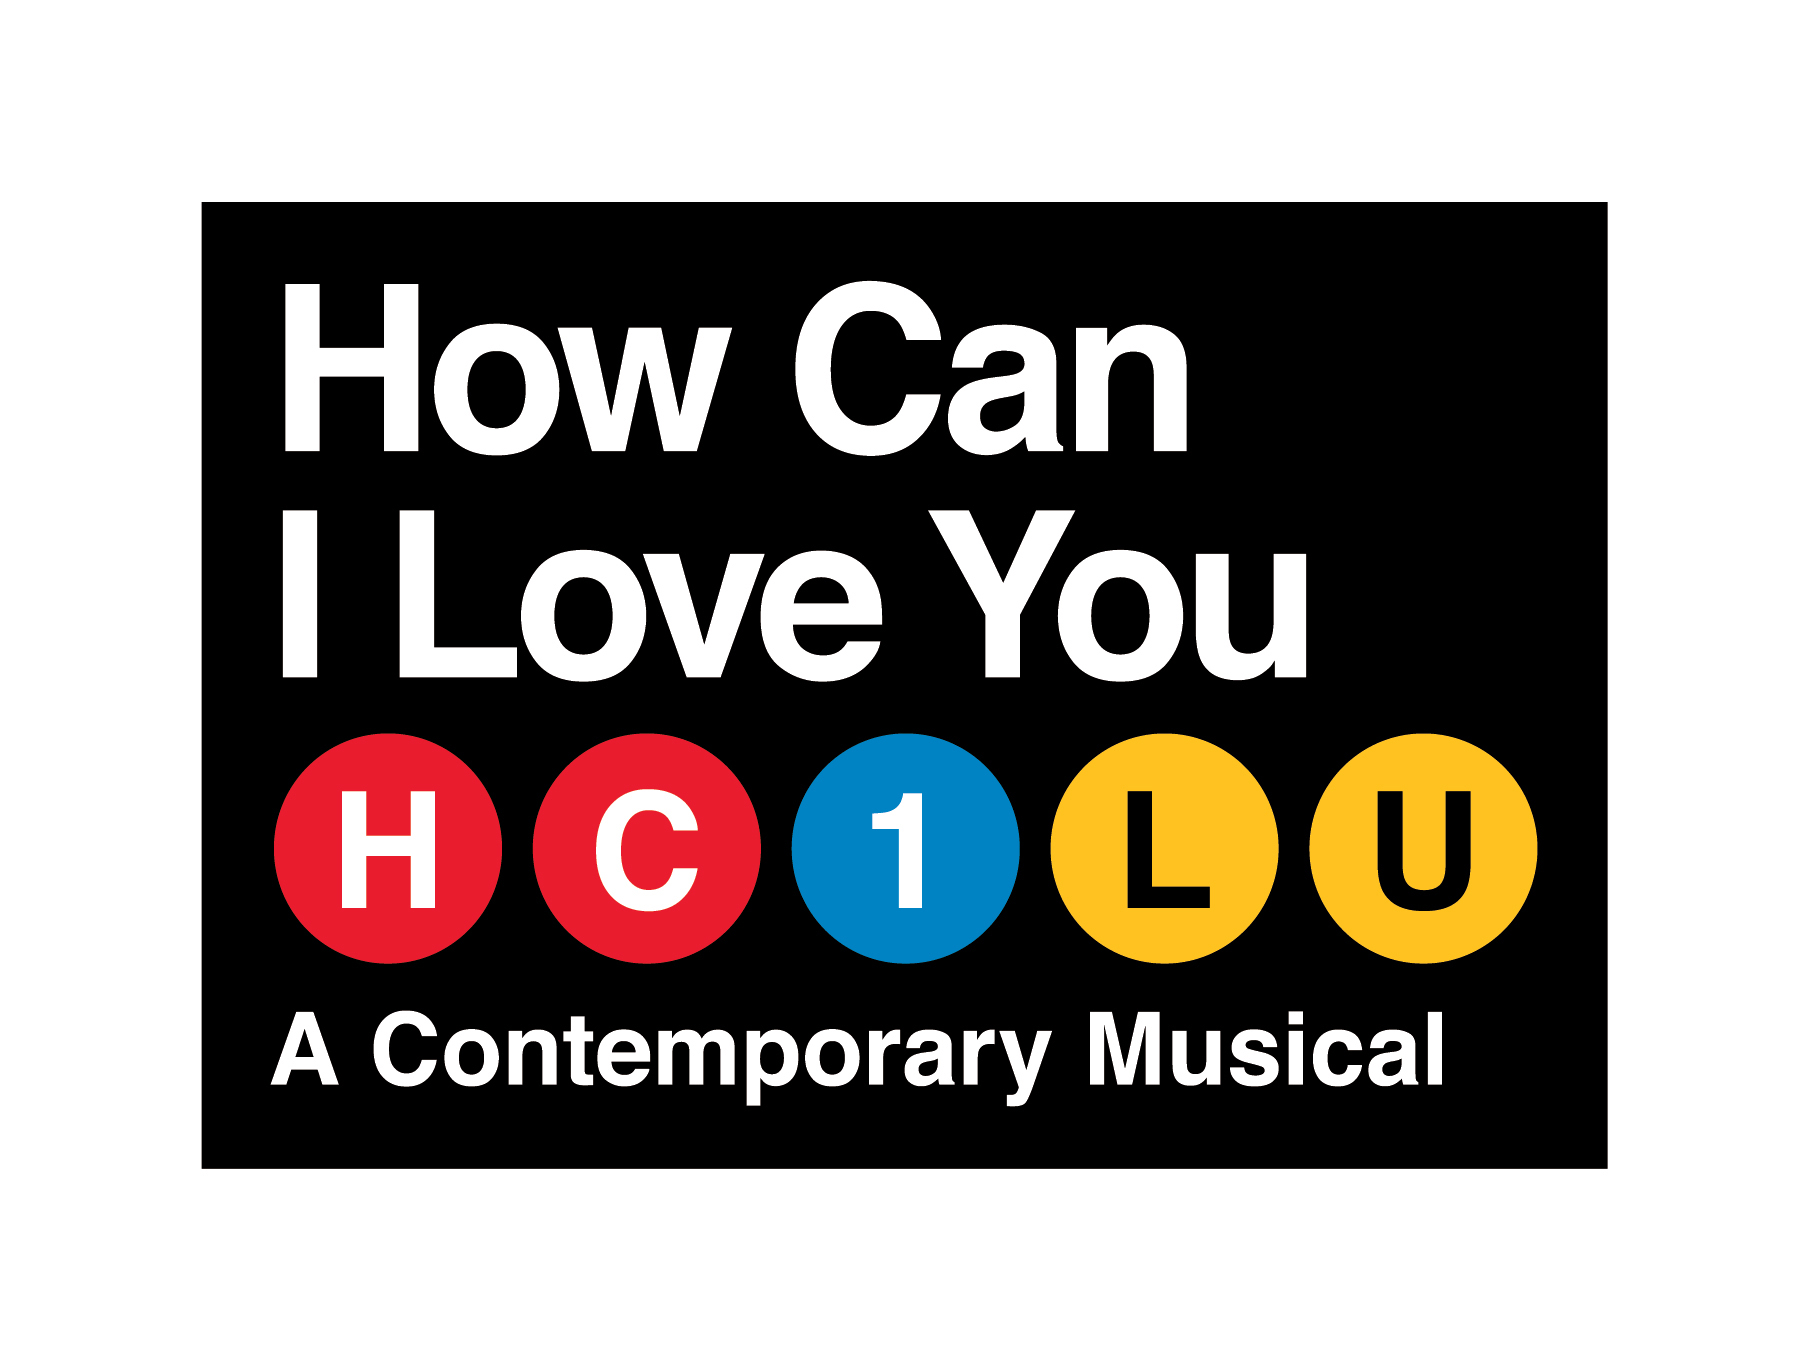 The contemporary musical, "How Can I Love You" celebrates life, love and music through the lens of healing.